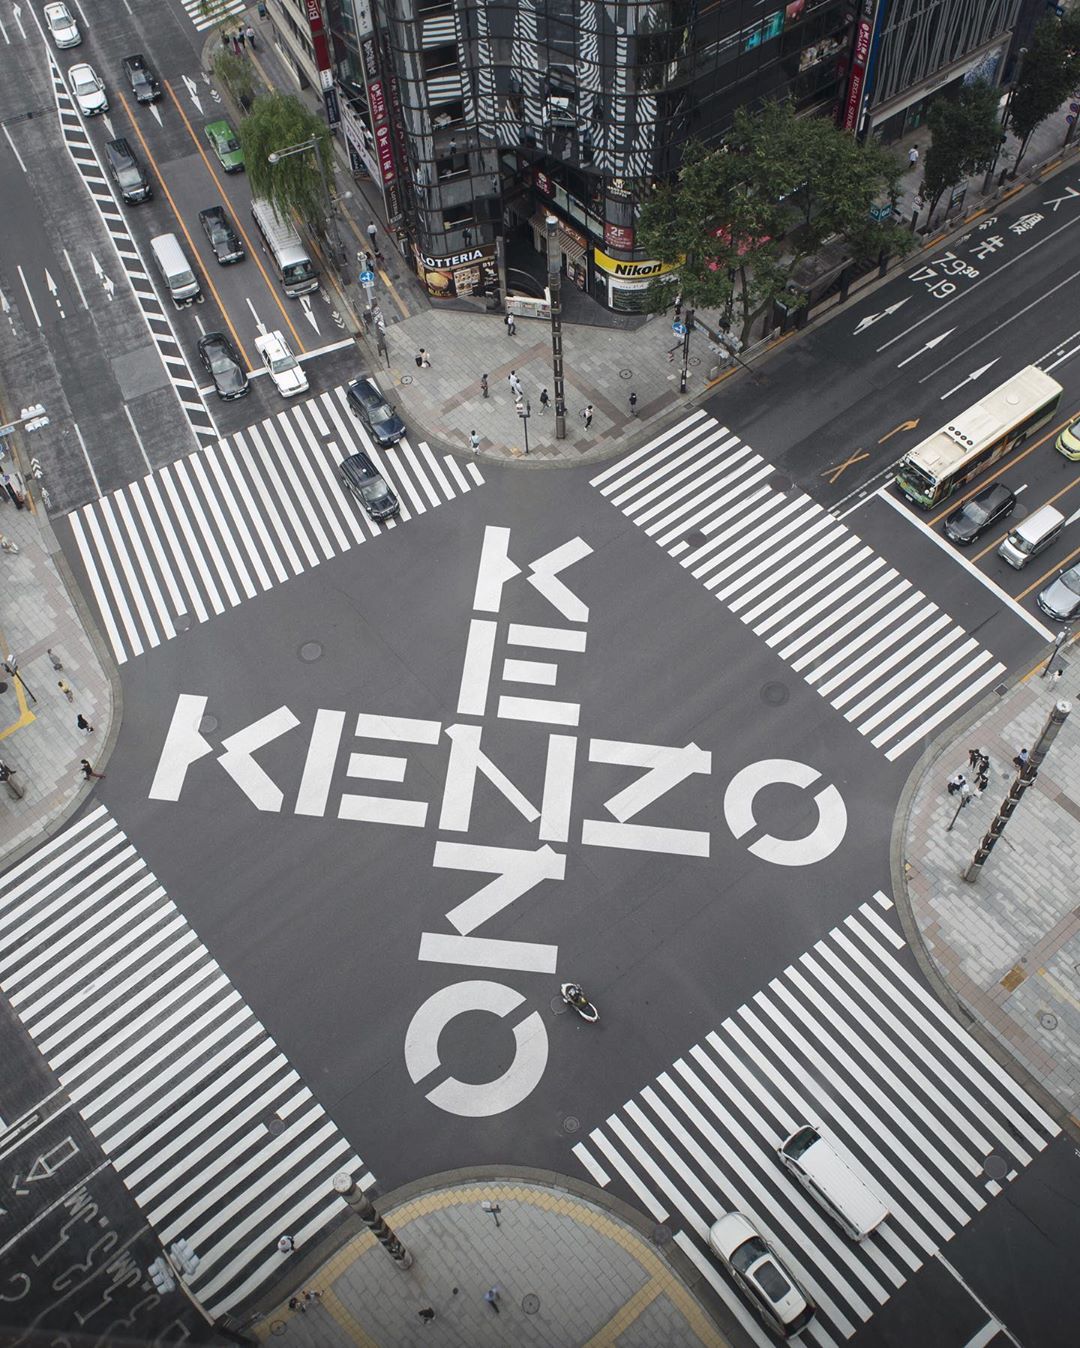 KENZO - GOING PLACES
The KENZO logo, transformed into an X for the new #KENZOsport line, takes over cities around the world.
#KENZOFOB